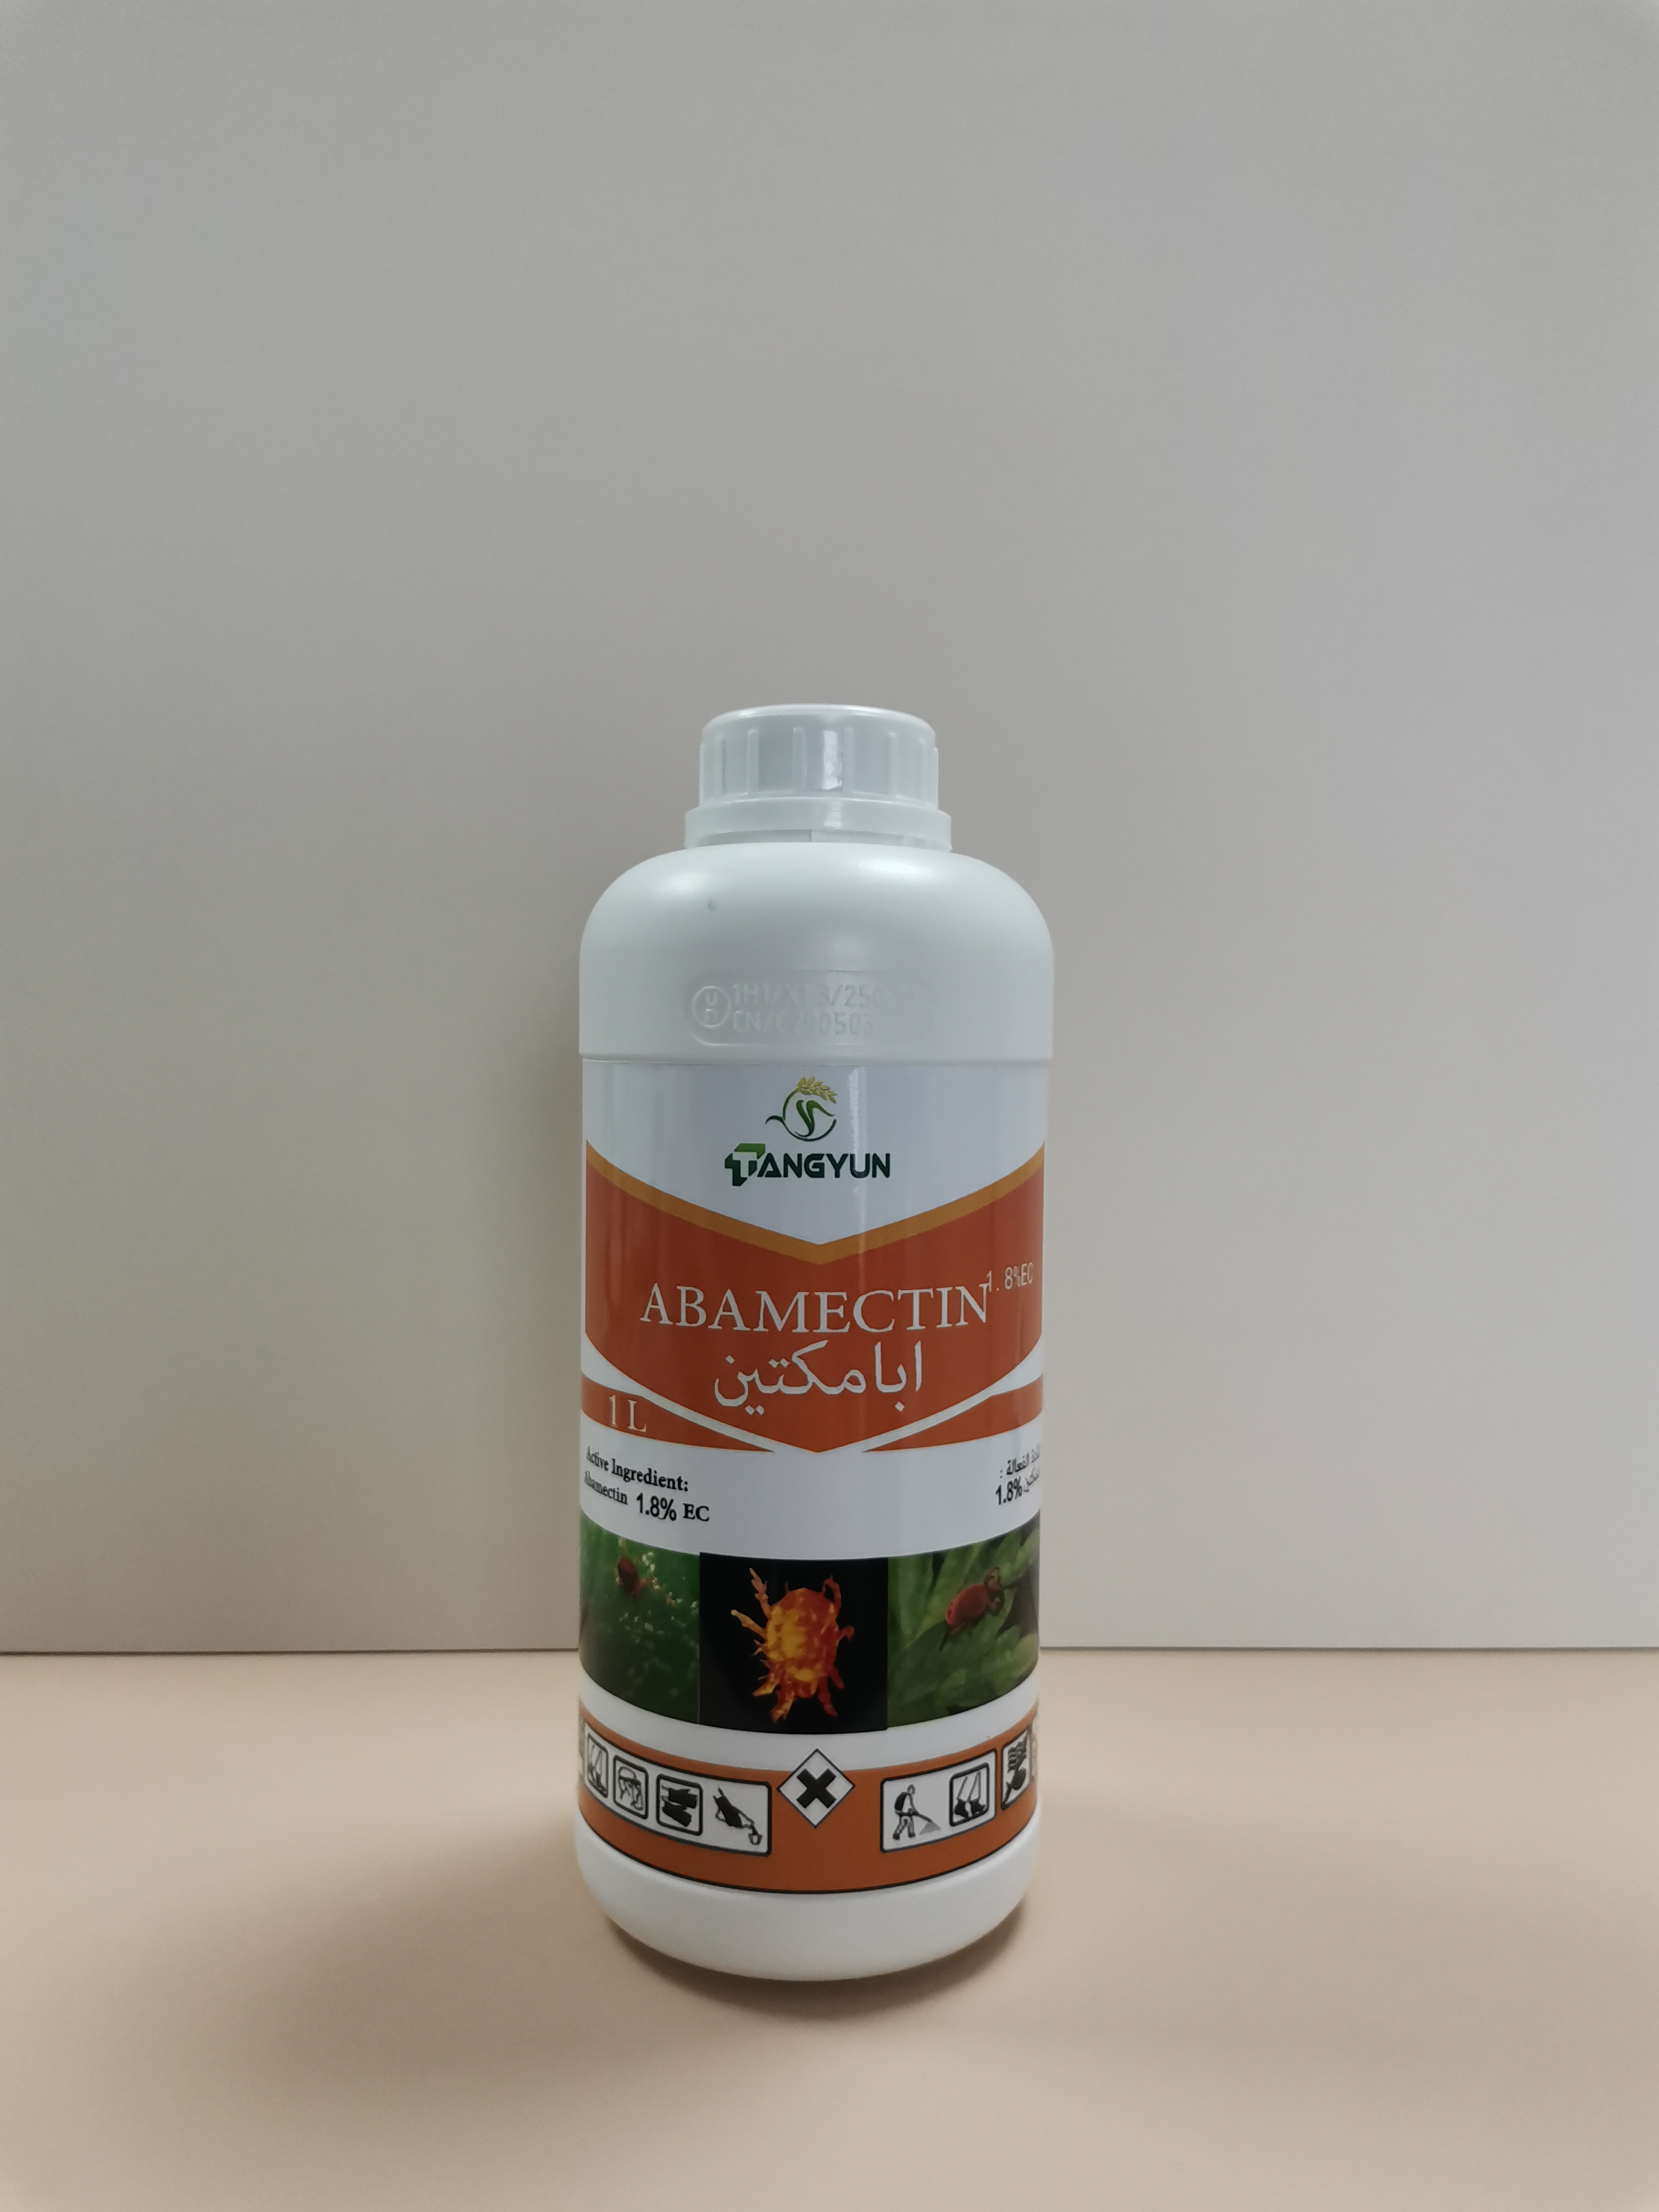 Abamectin – Aacaricide Pesticide for Plants and Crops – TangYun Supplier